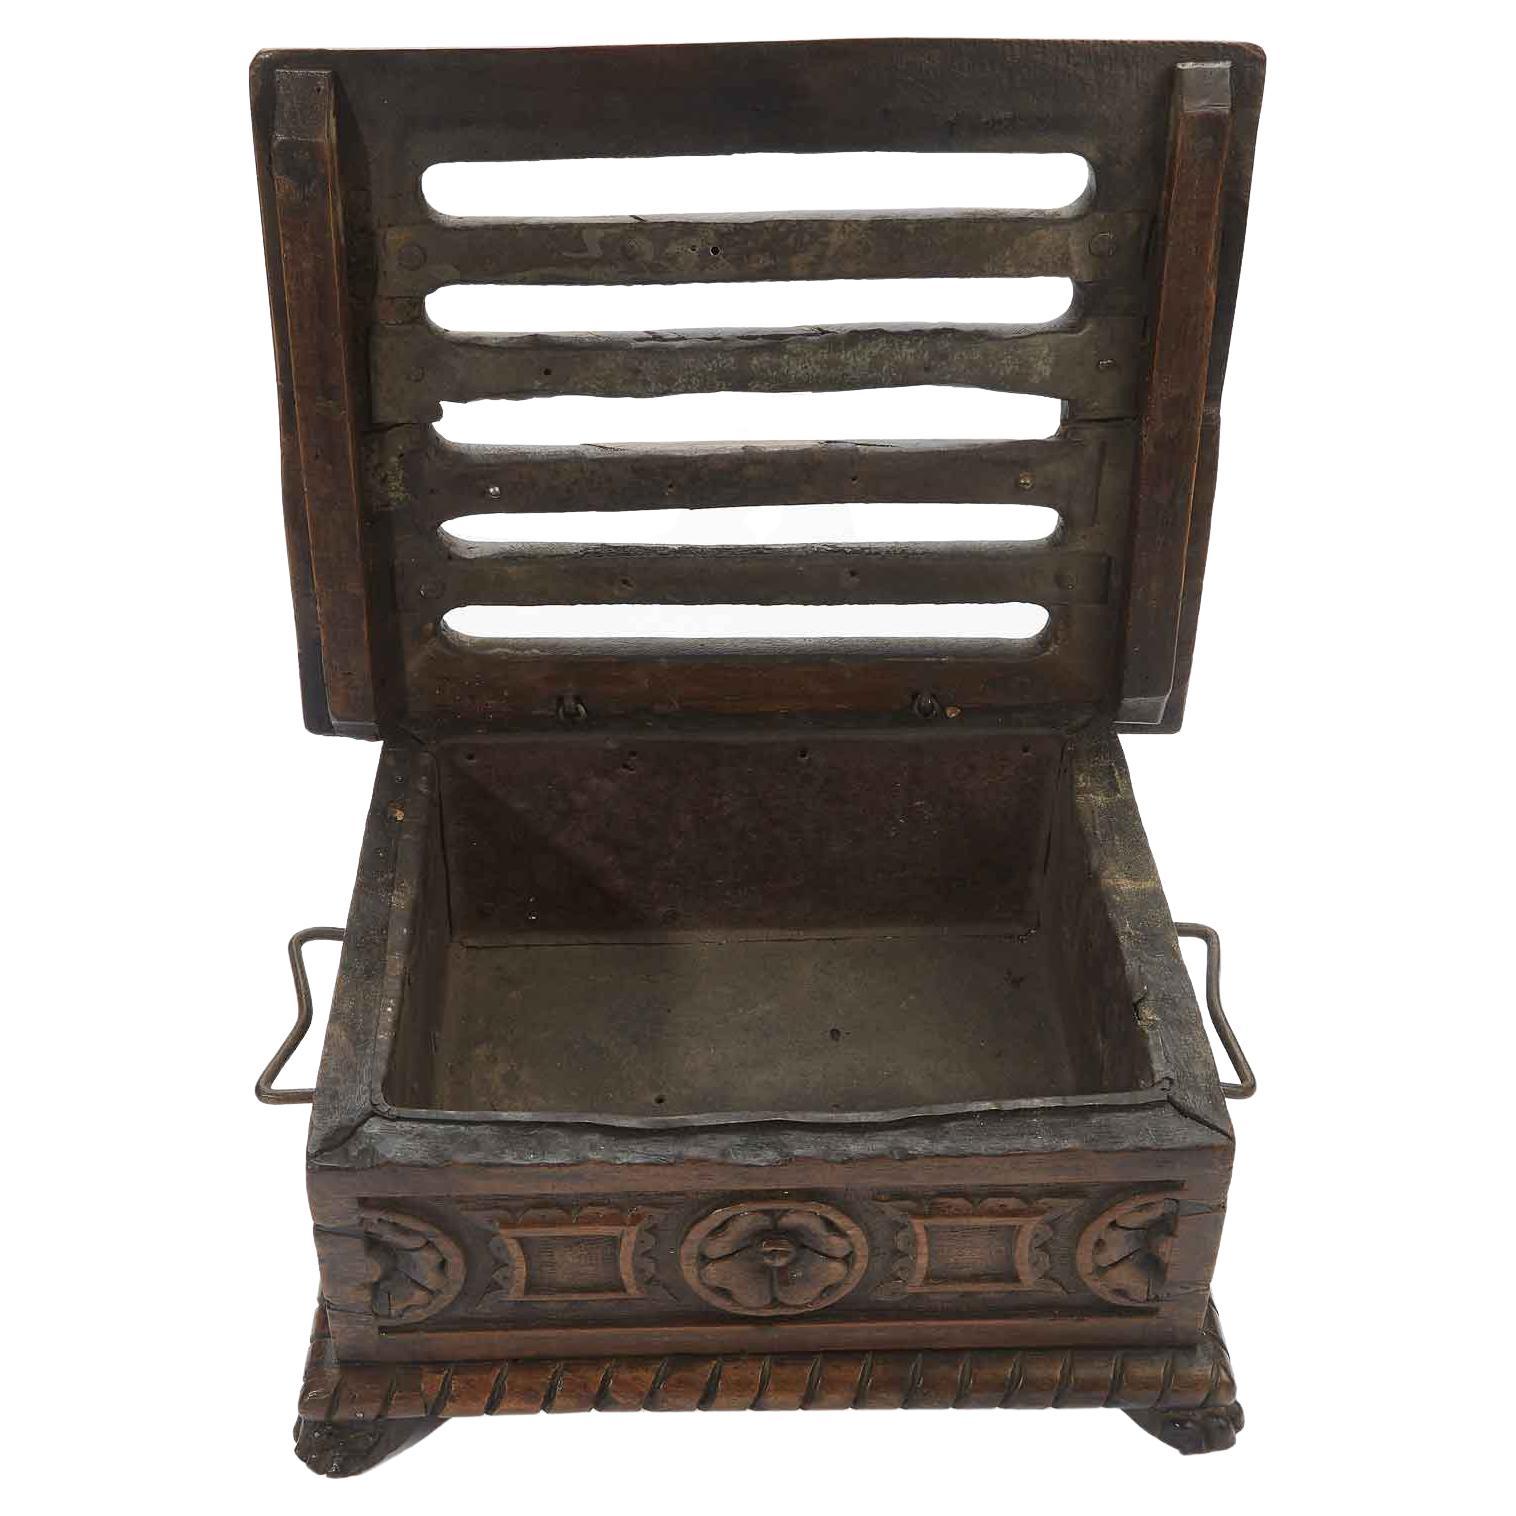 Early 17th century hand carved walnut foot warmer of Northern Italian origin, it looks like an antique box but features a metal container inside, and it was commonly used in Italian noble families of 1600 as warmer, to hold hot coals or glowing